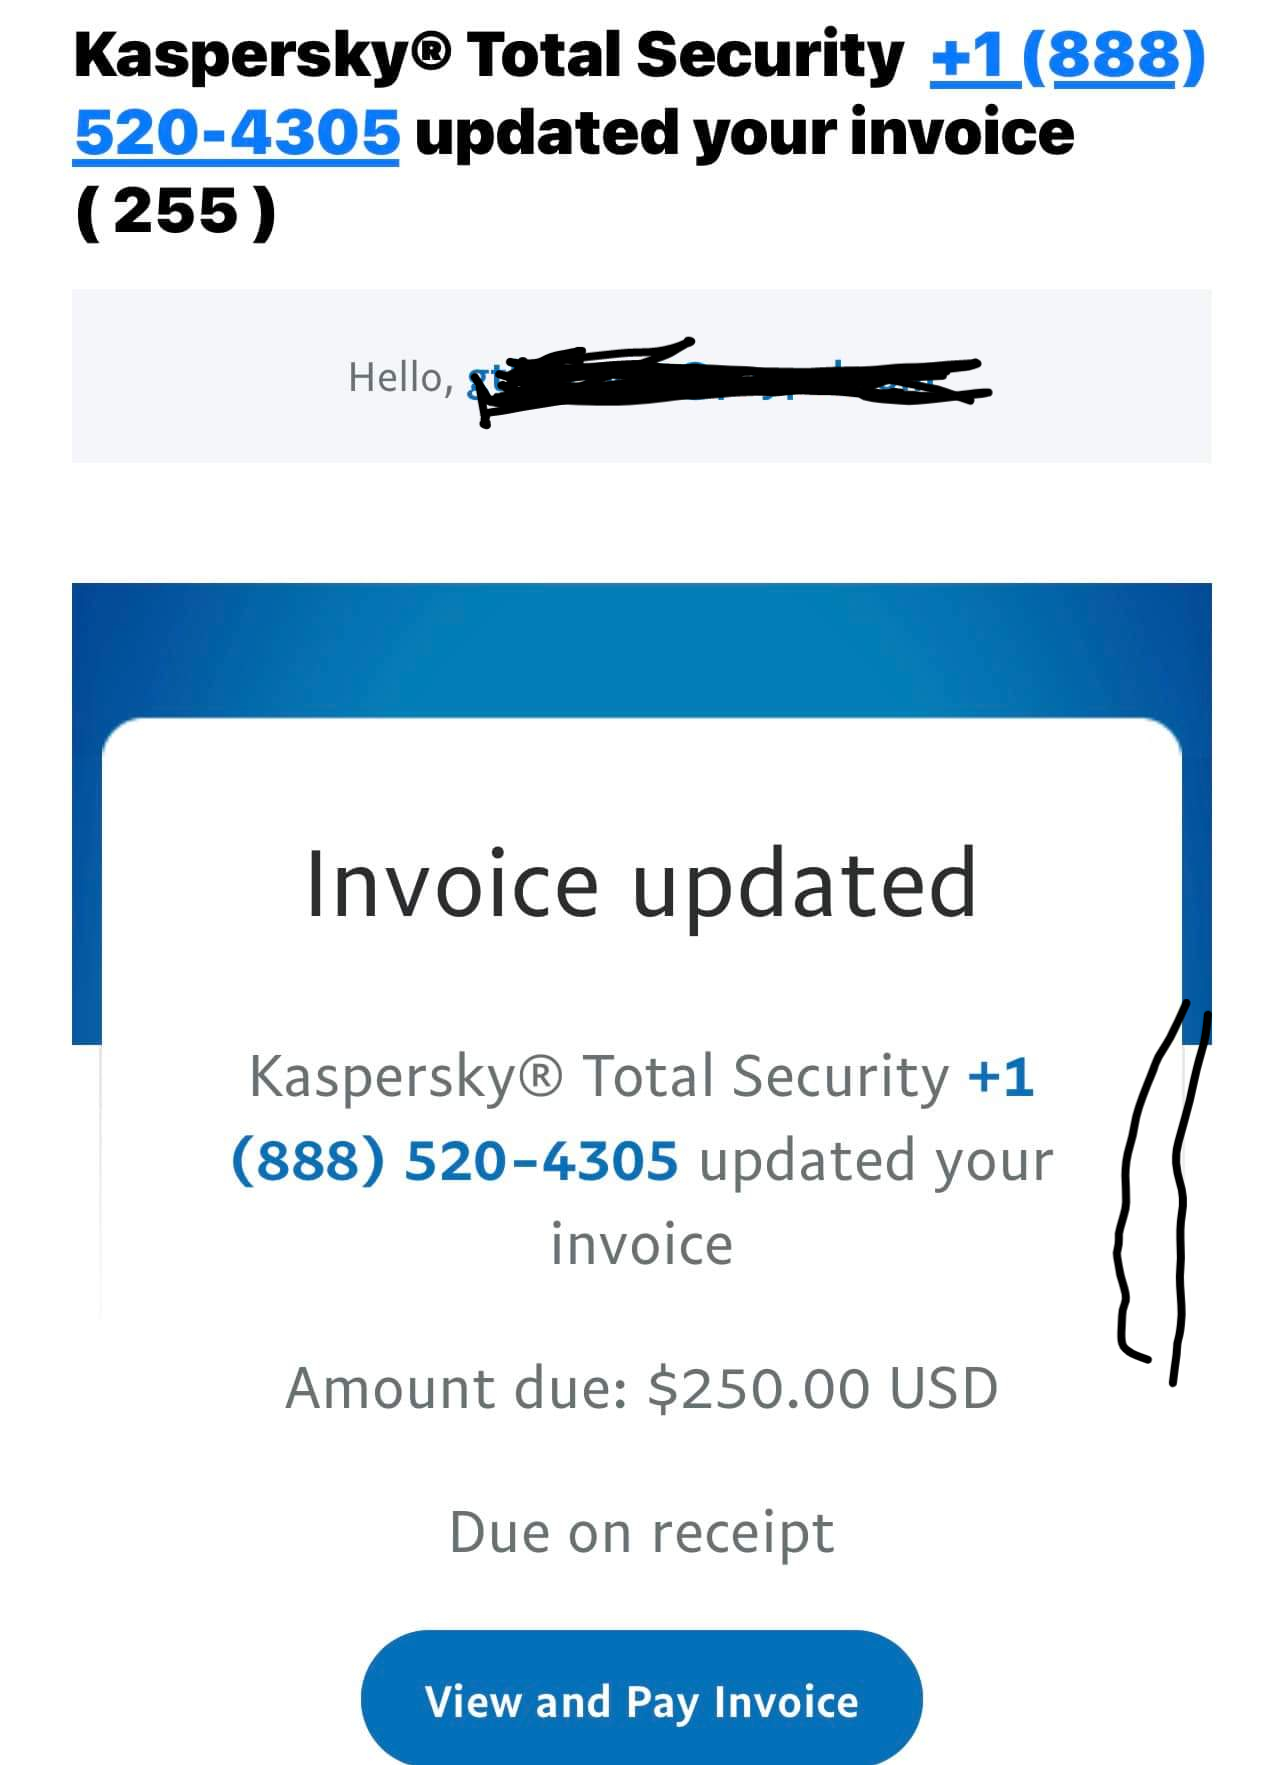 Kaspersky Total Security Scam Email Message